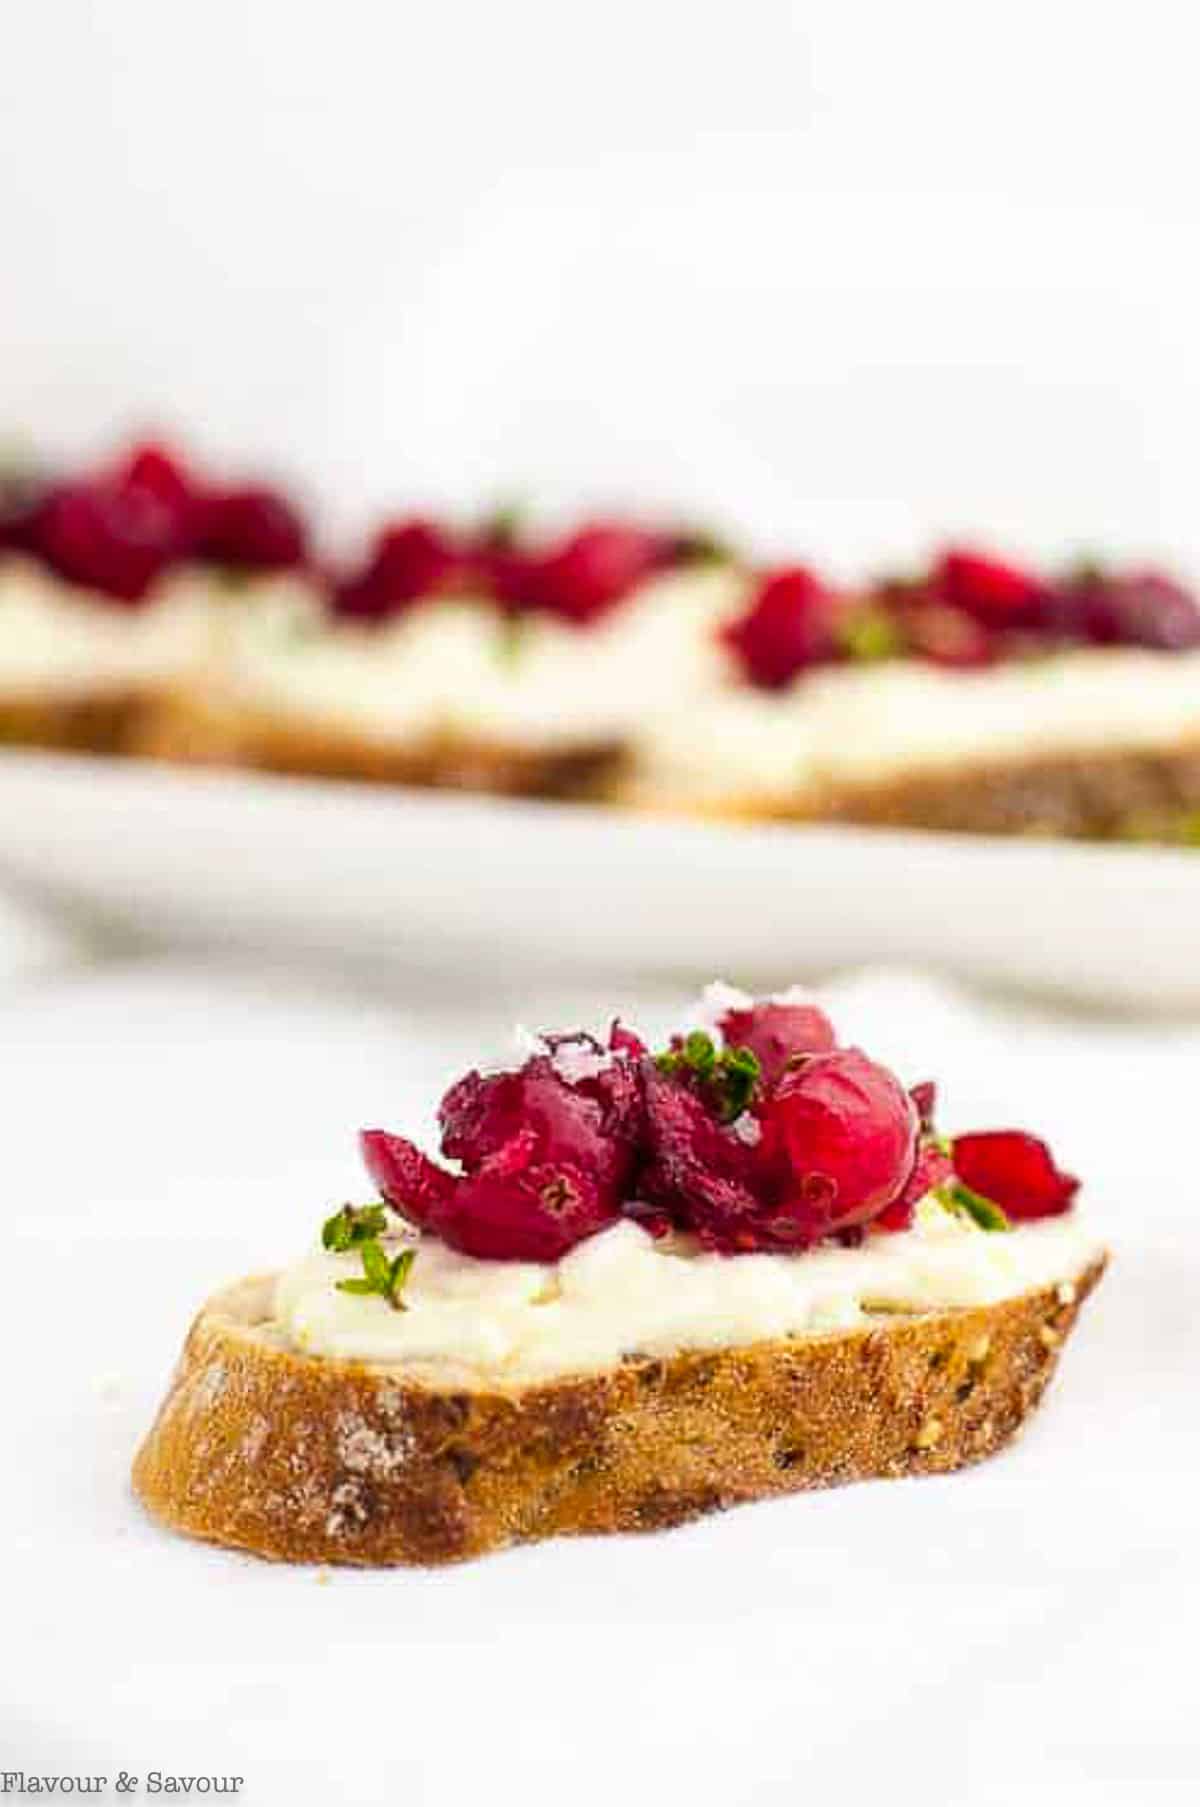 Close up view of a slice of toasted baguette topped with whipped ricotta cheese and fresh, sweetened cranberries.